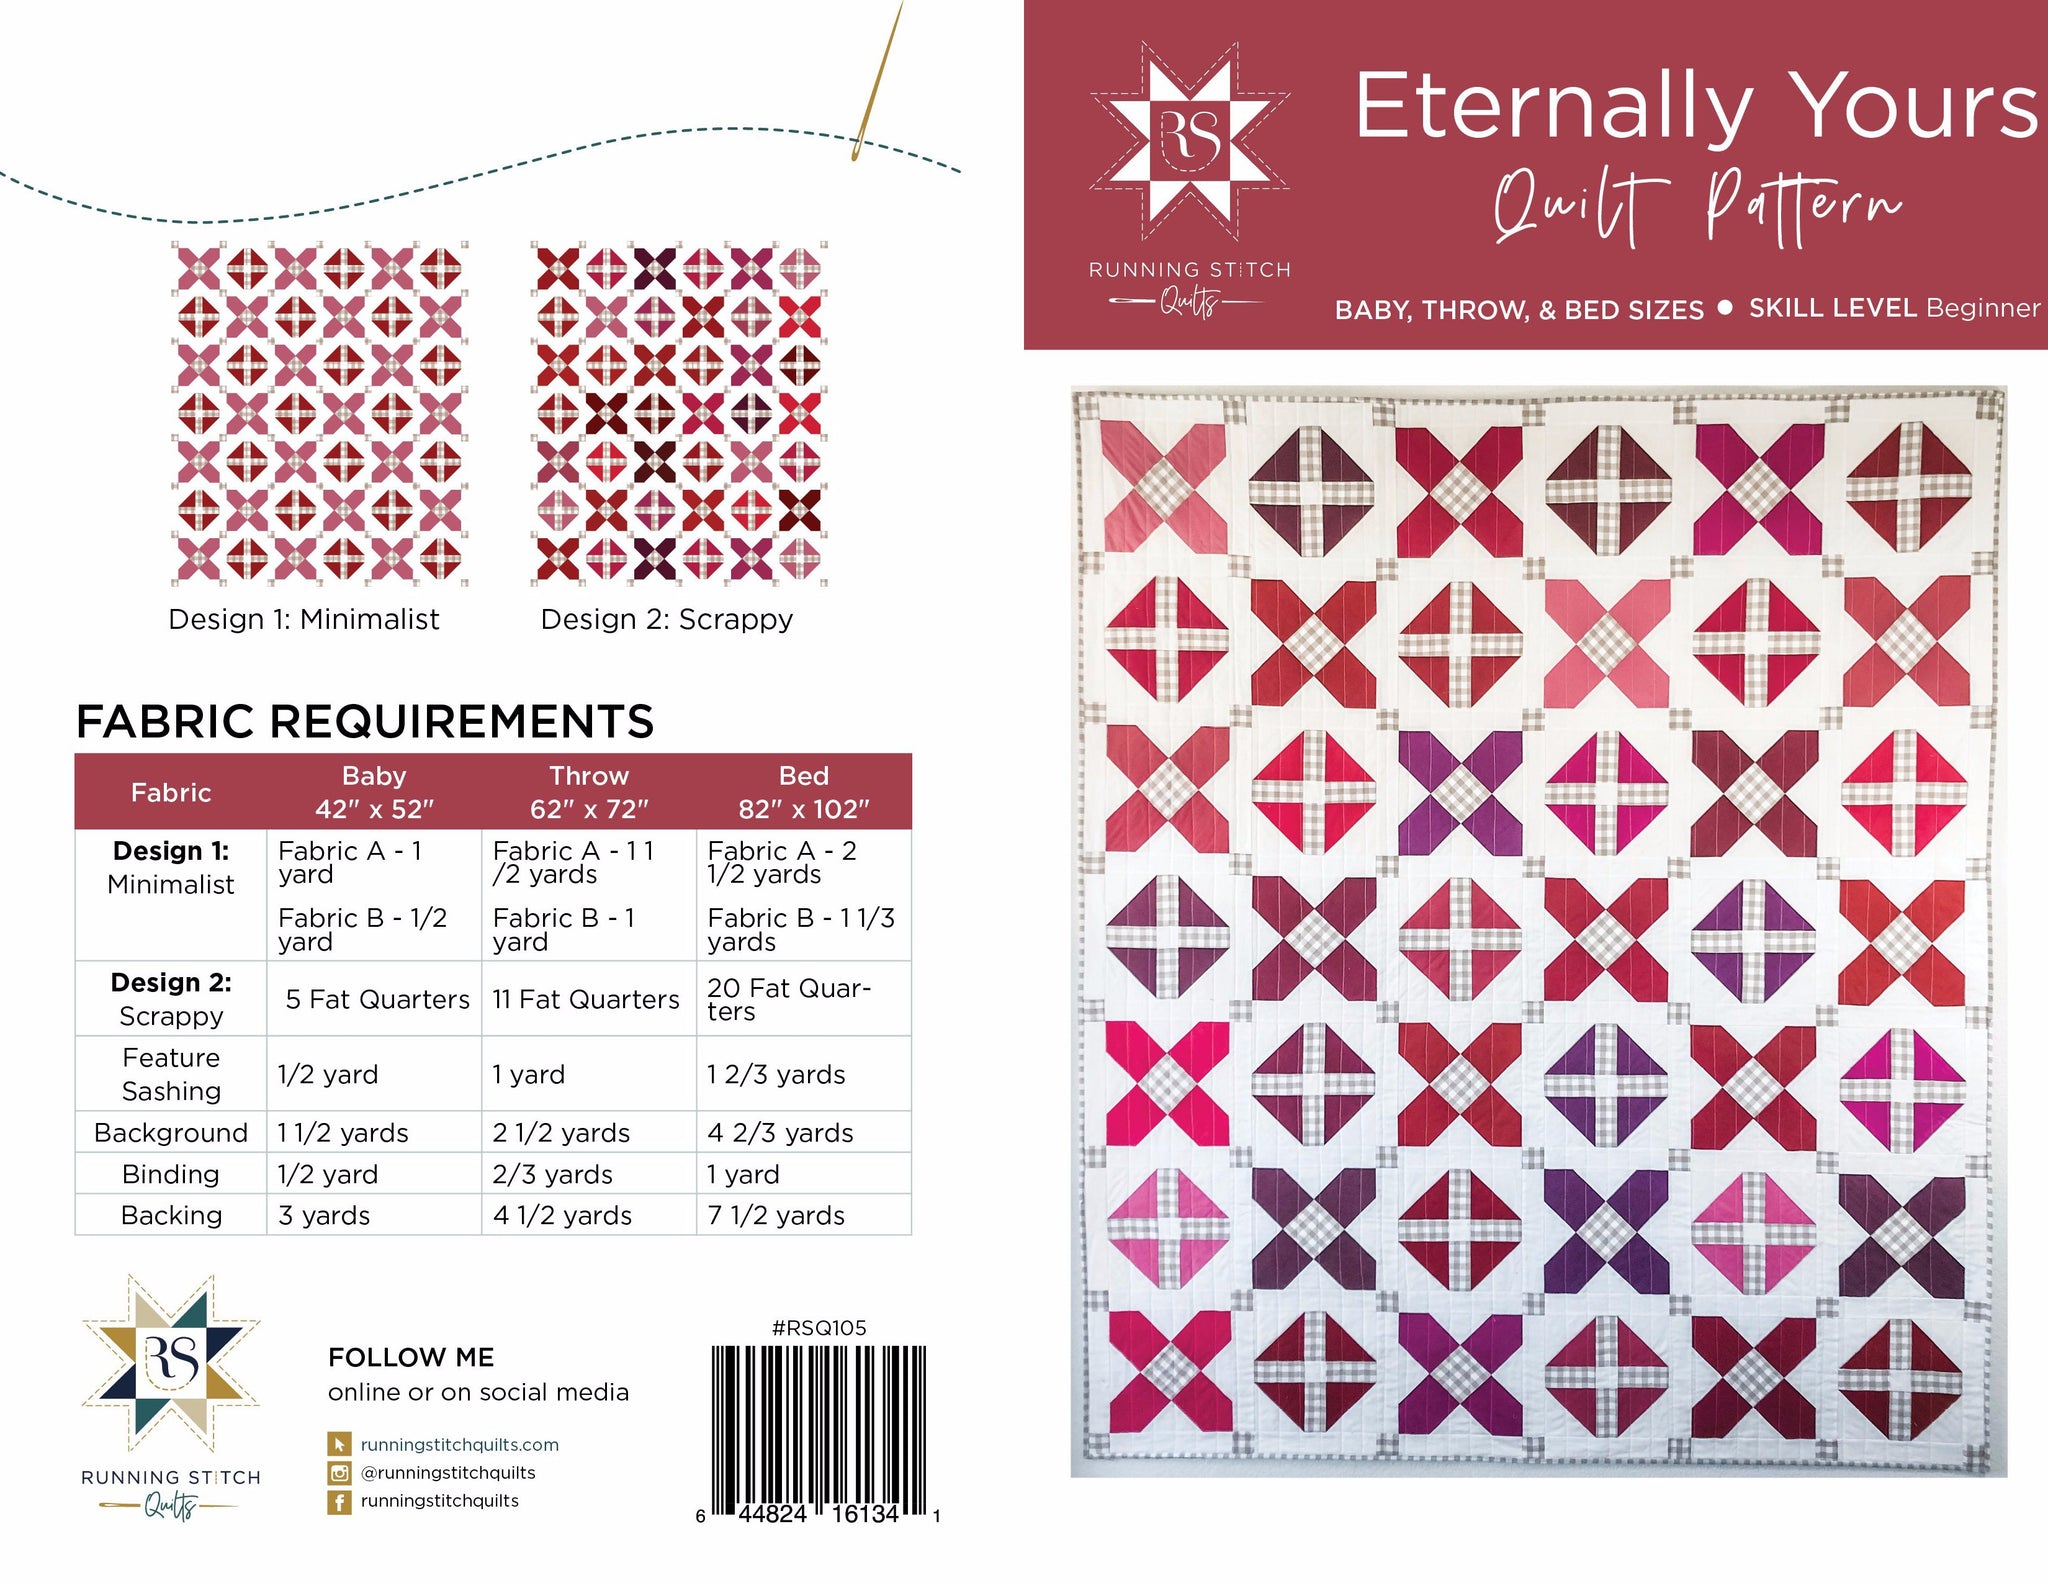 iThinksew - Patterns and More - Starry Pinwheel – ten size FPP pattern  incl. quilt fabric requirements (PDF Download)